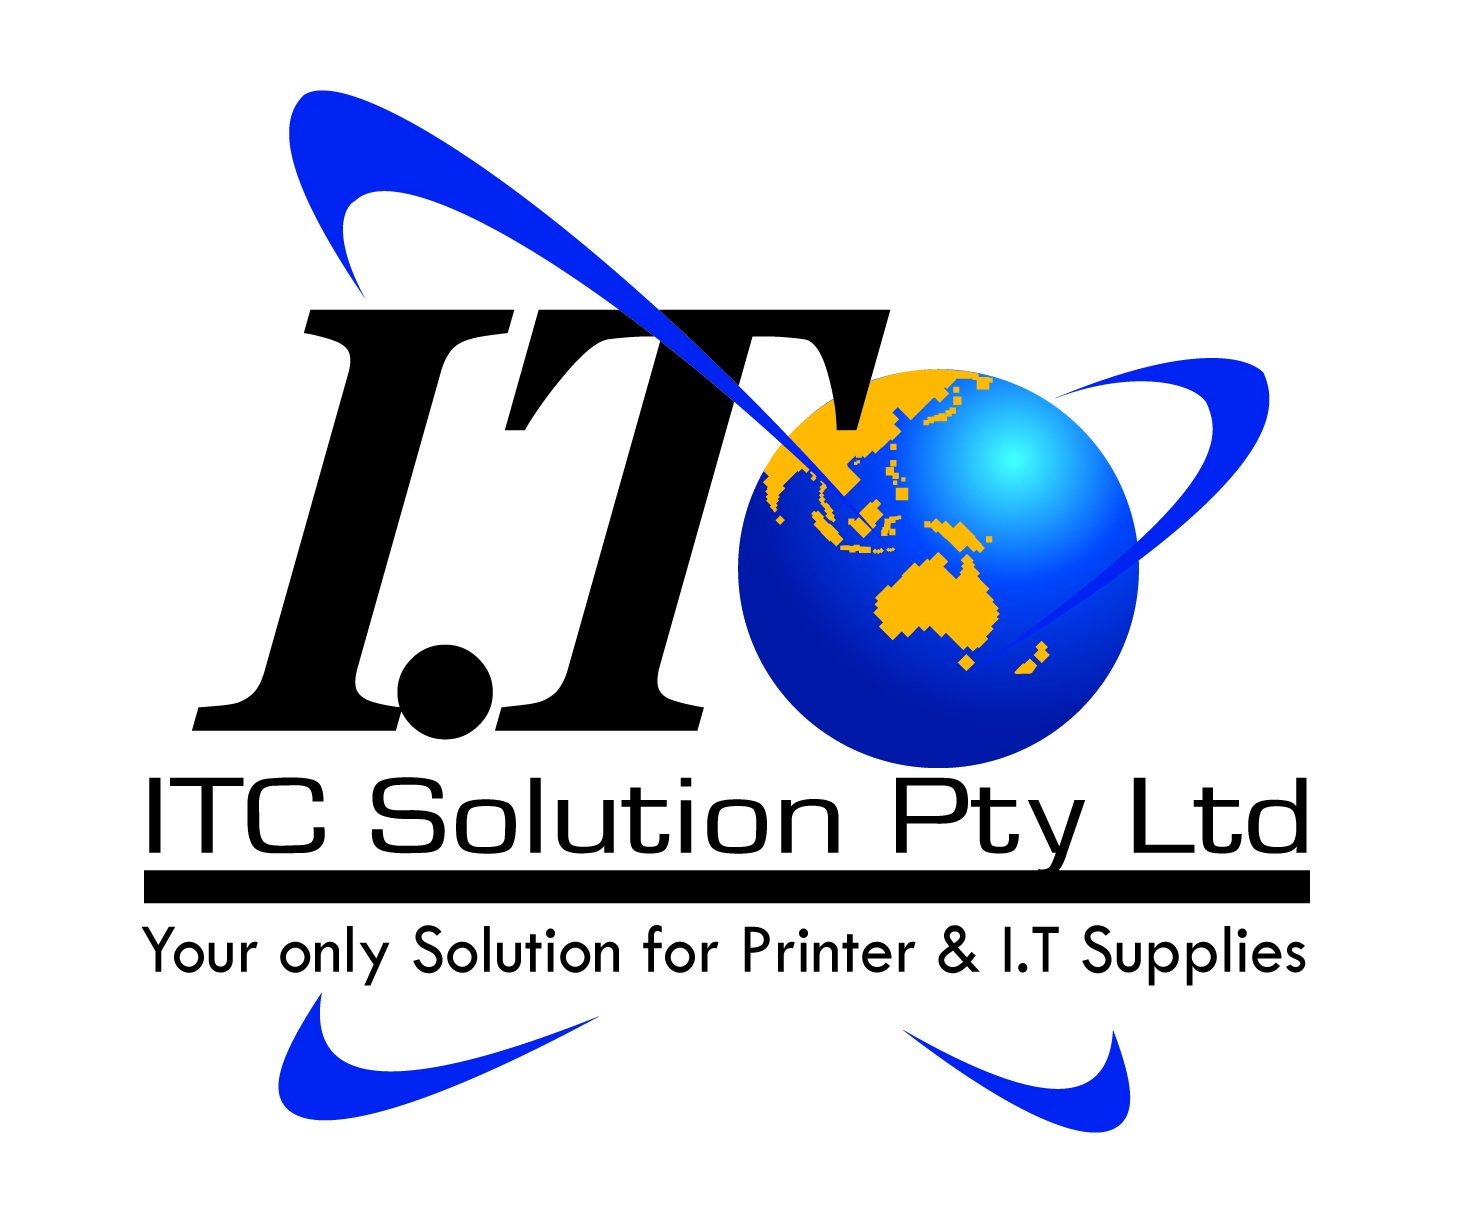 ITC Solutions